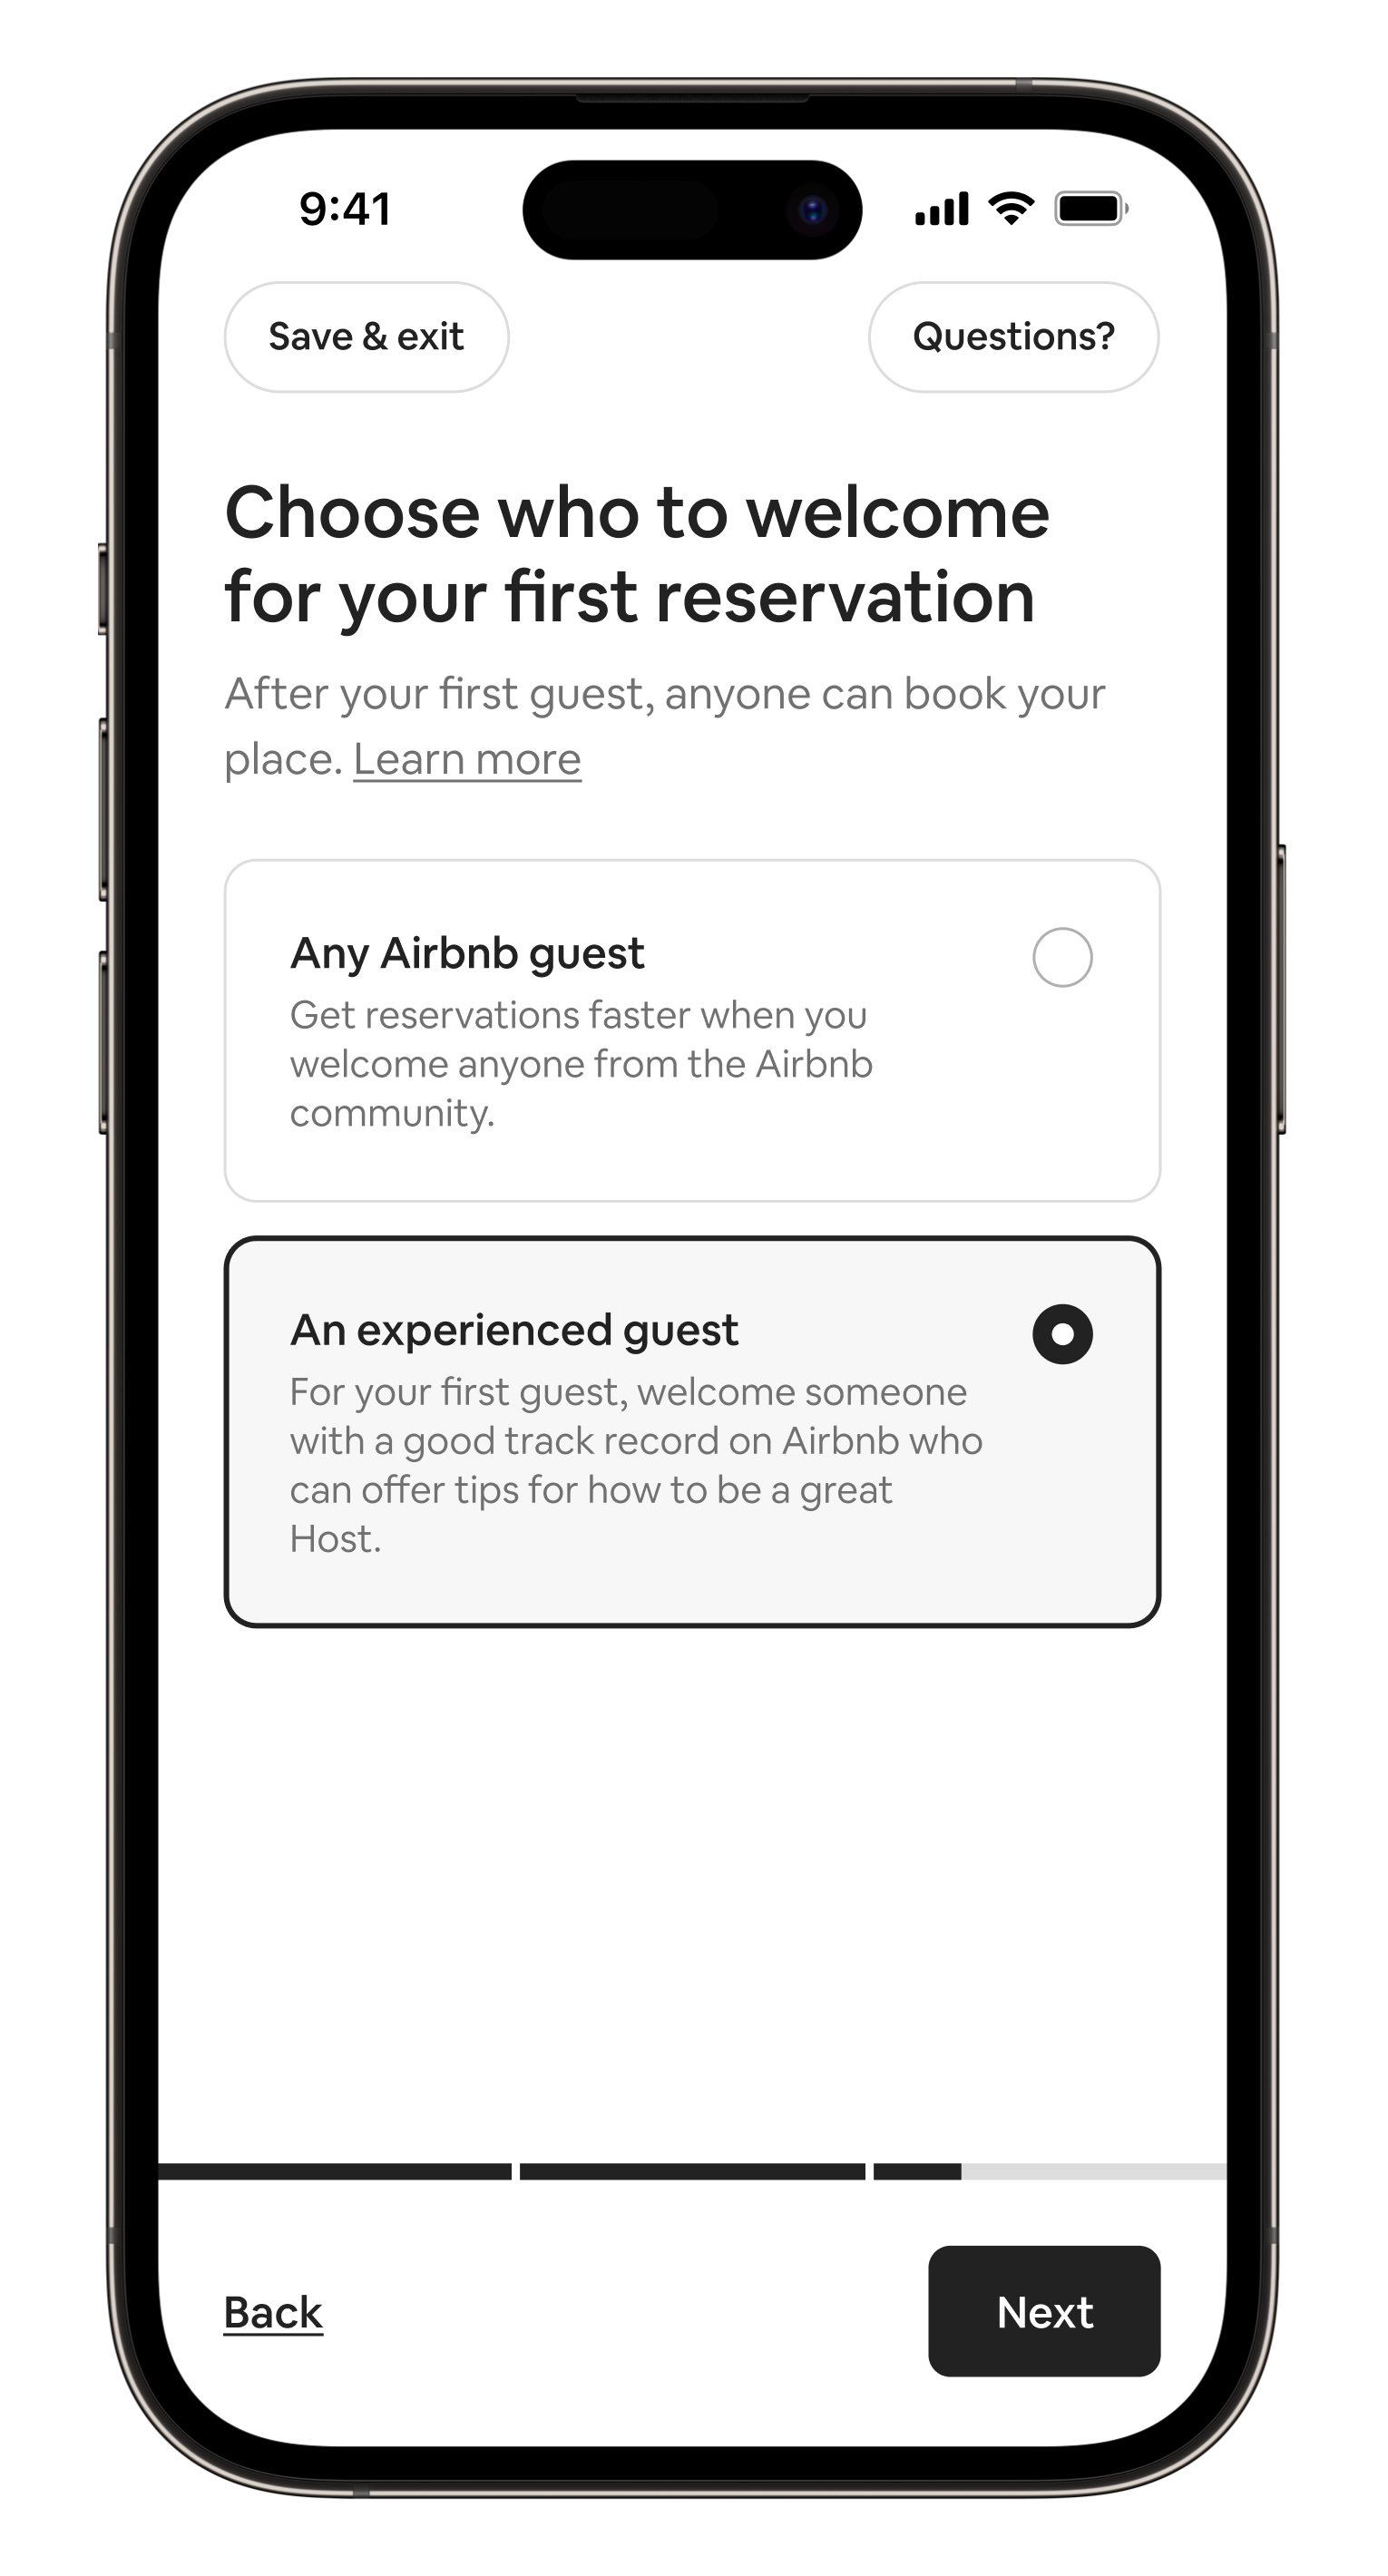 Airbnb Setup featured within the app on an iPhone device. Image shows the product flow a new Host would go through if they wanted to select an experienced guest as their first guest. The option appears in a bulleted list underneath the any guest option.